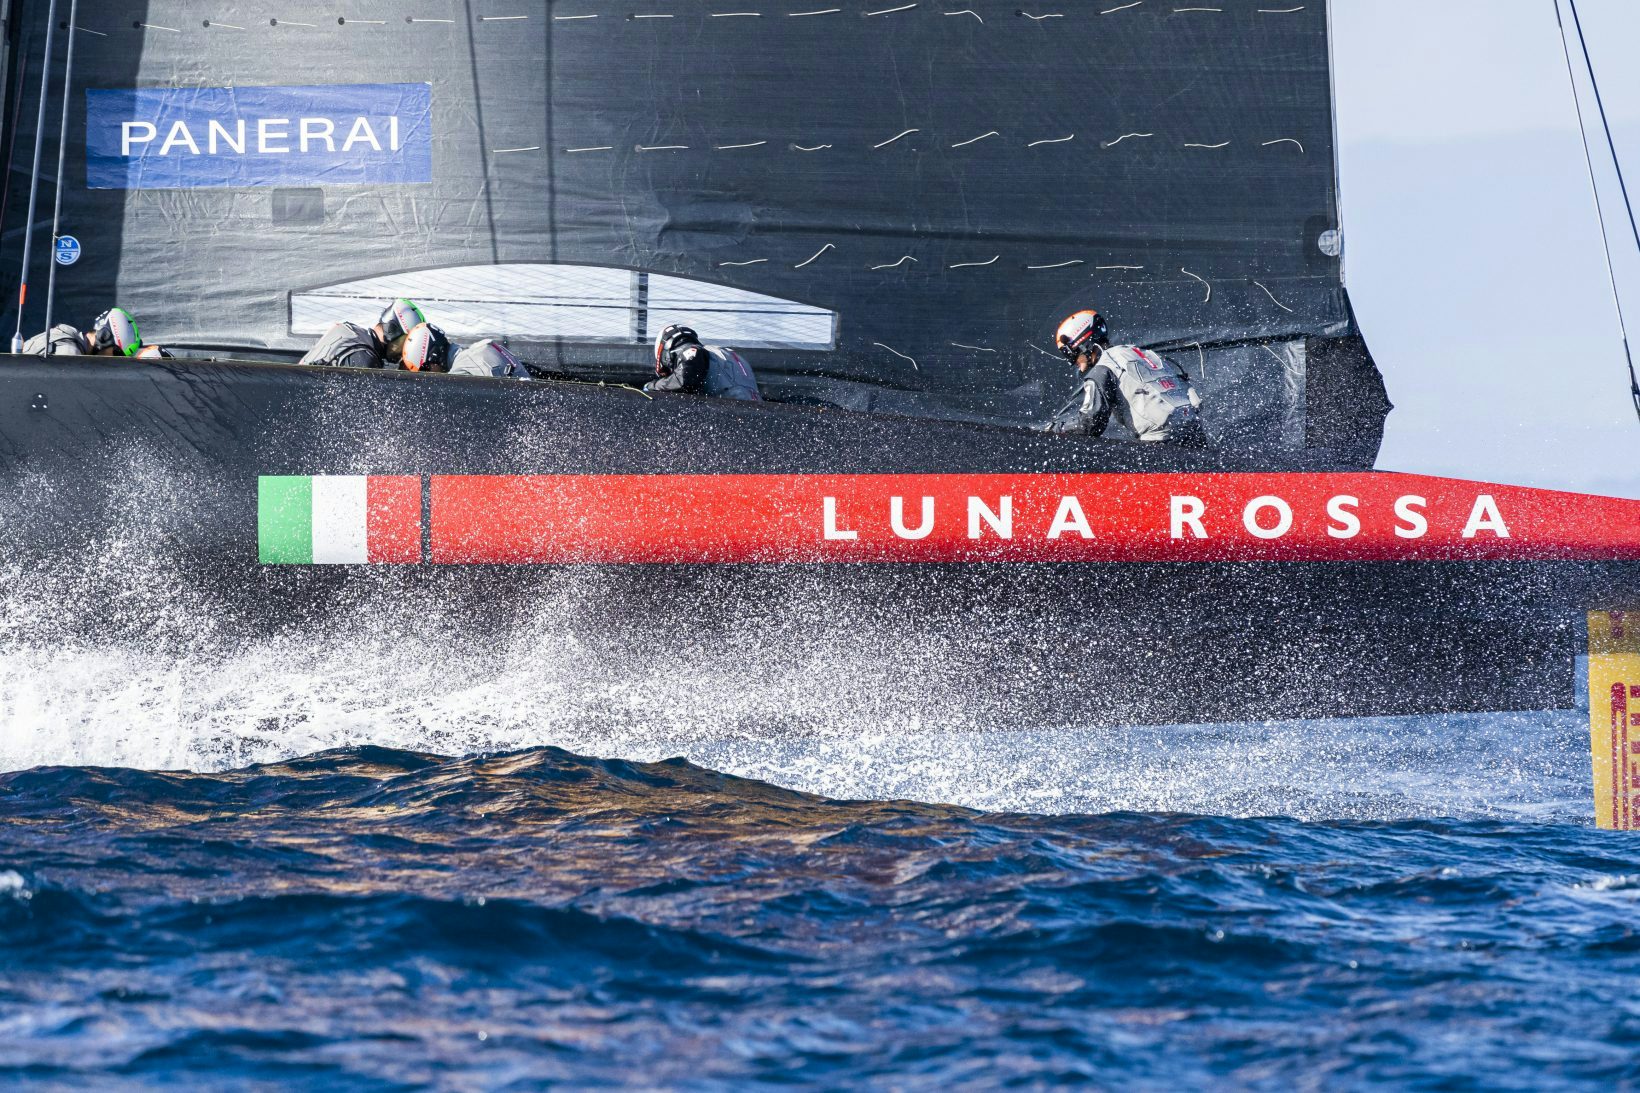 America’s Cup : Luna Rossa, ready to ride the wave